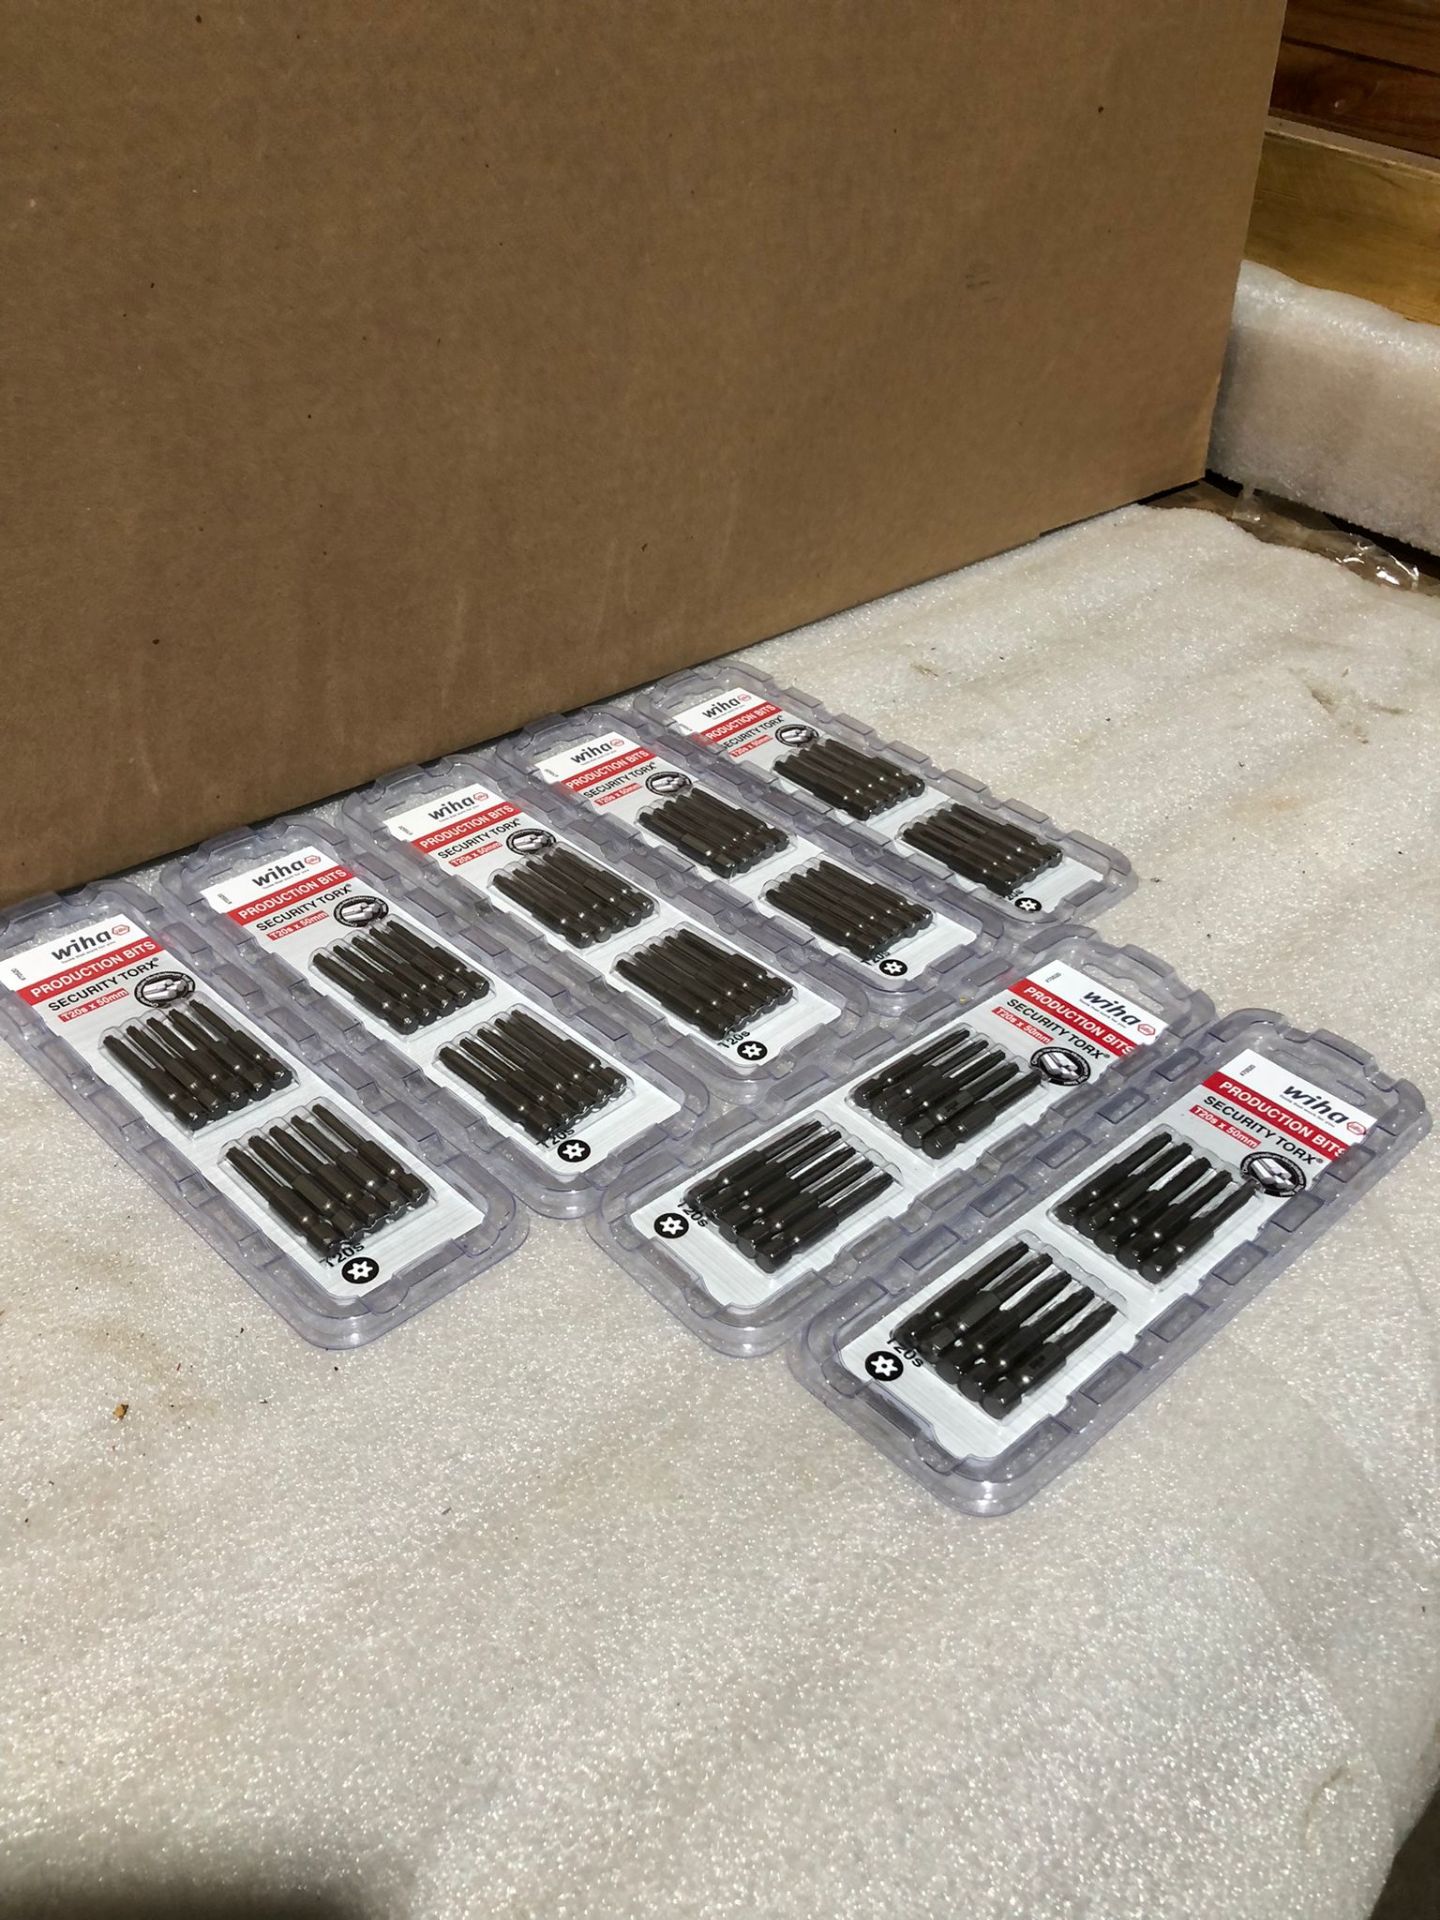 Lot of 7 (7 packs) of WIHA Production Bits Security Torx - T20s x 50mm